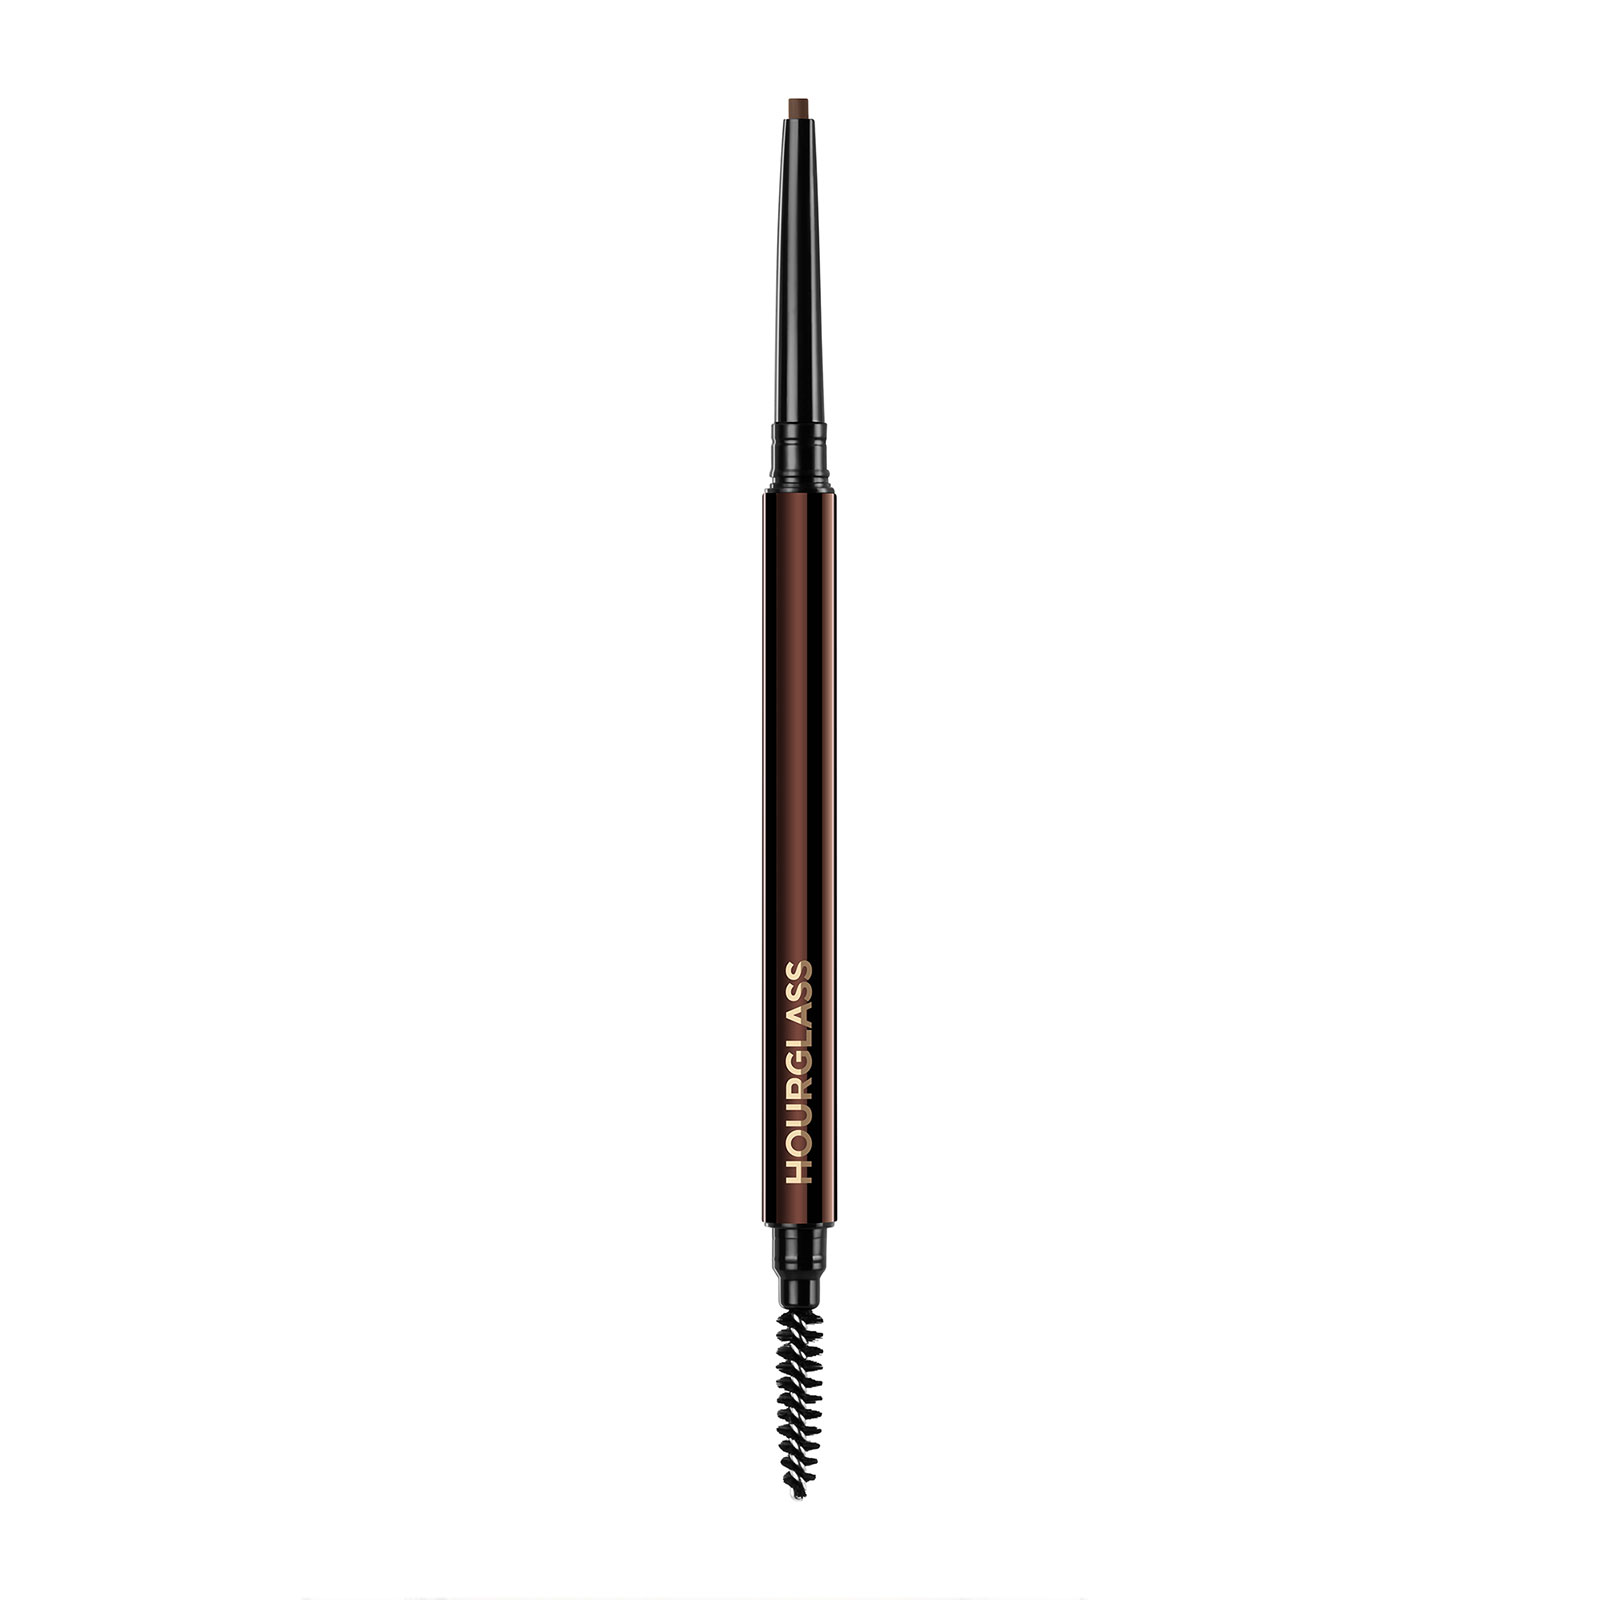 Hourglass Arch Brow Micro Sculpting Pencil 0.4G Warm Brunette